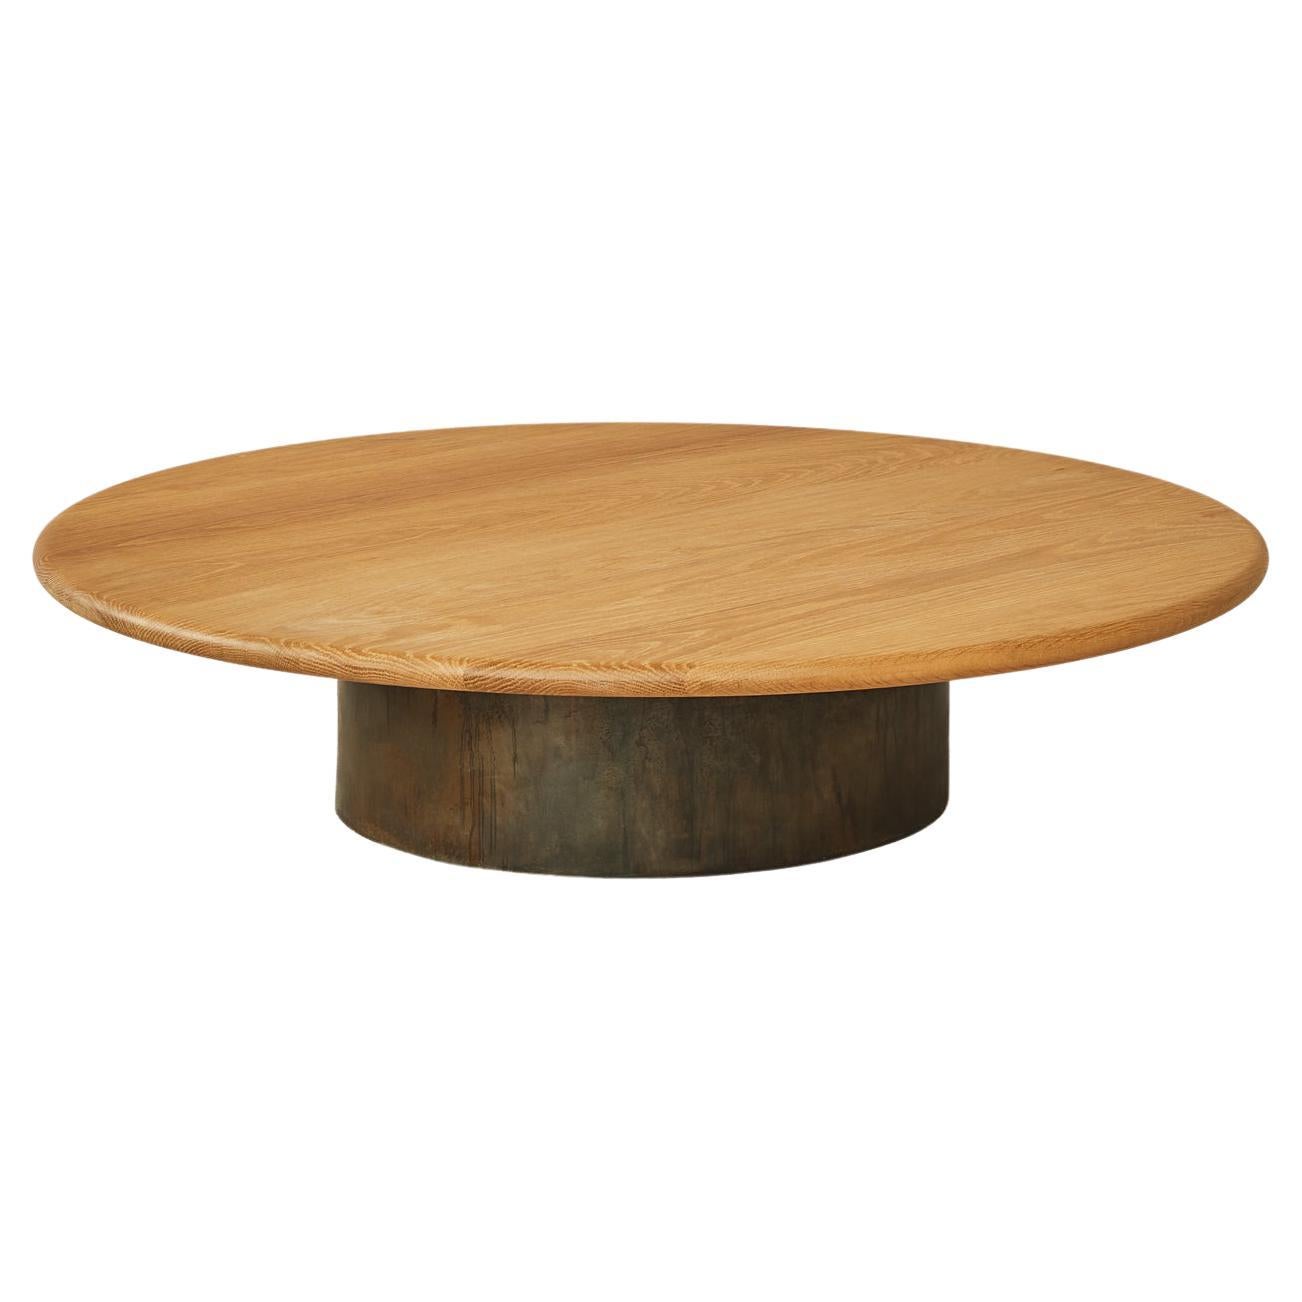 Raindrop Coffee Table, 1000, Oak / Patinated For Sale